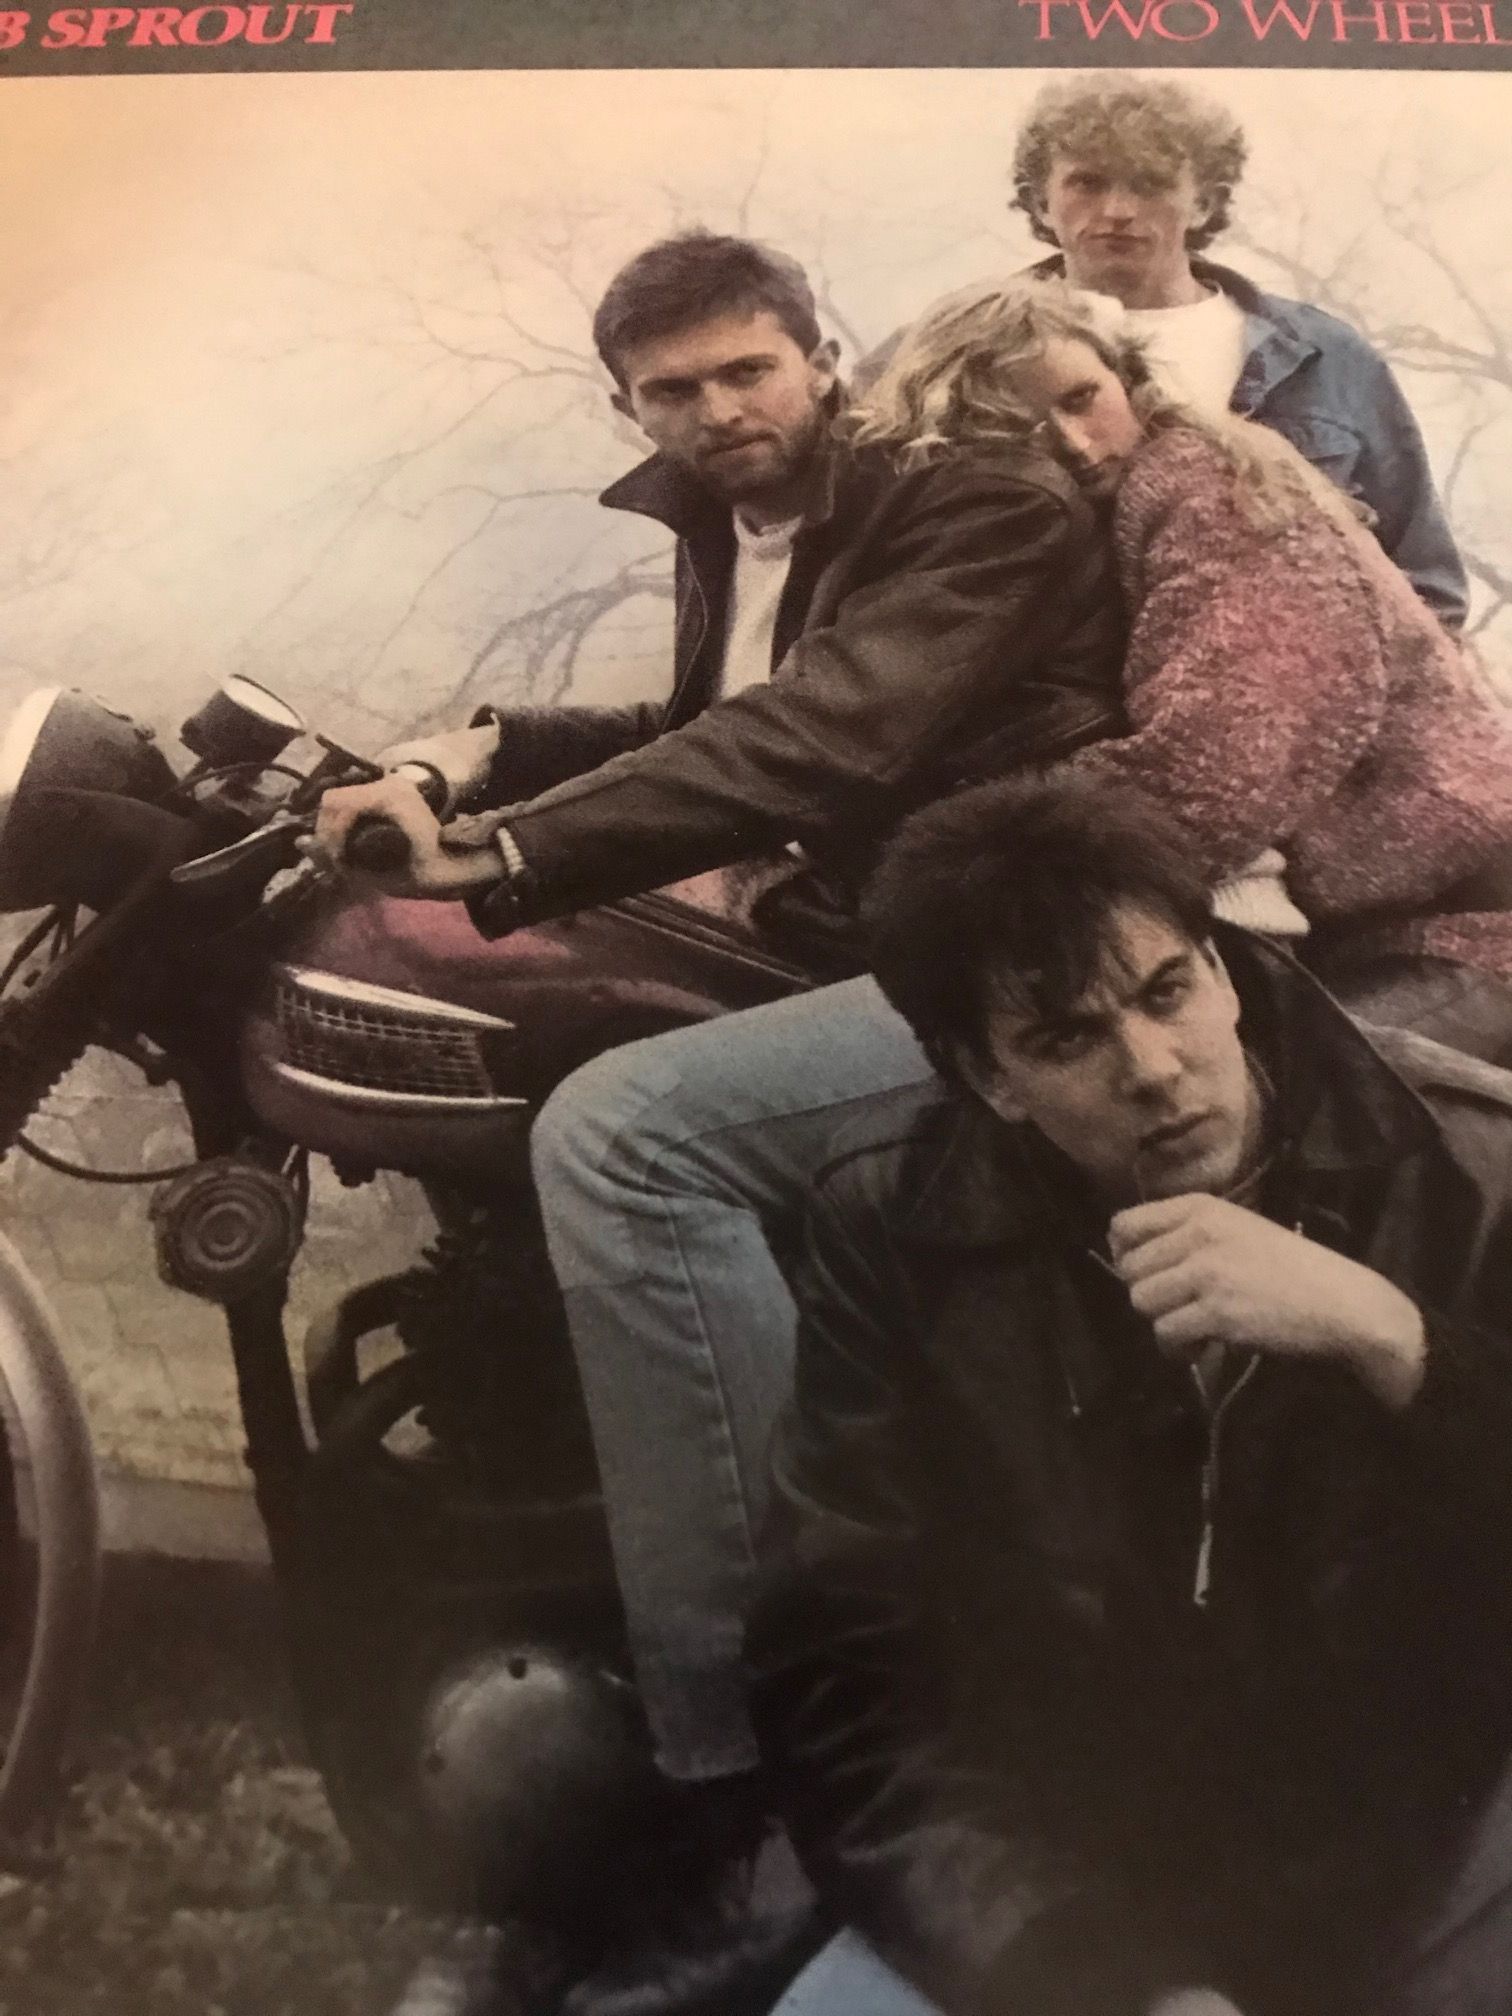 Prefab Sprout two wheels good 6